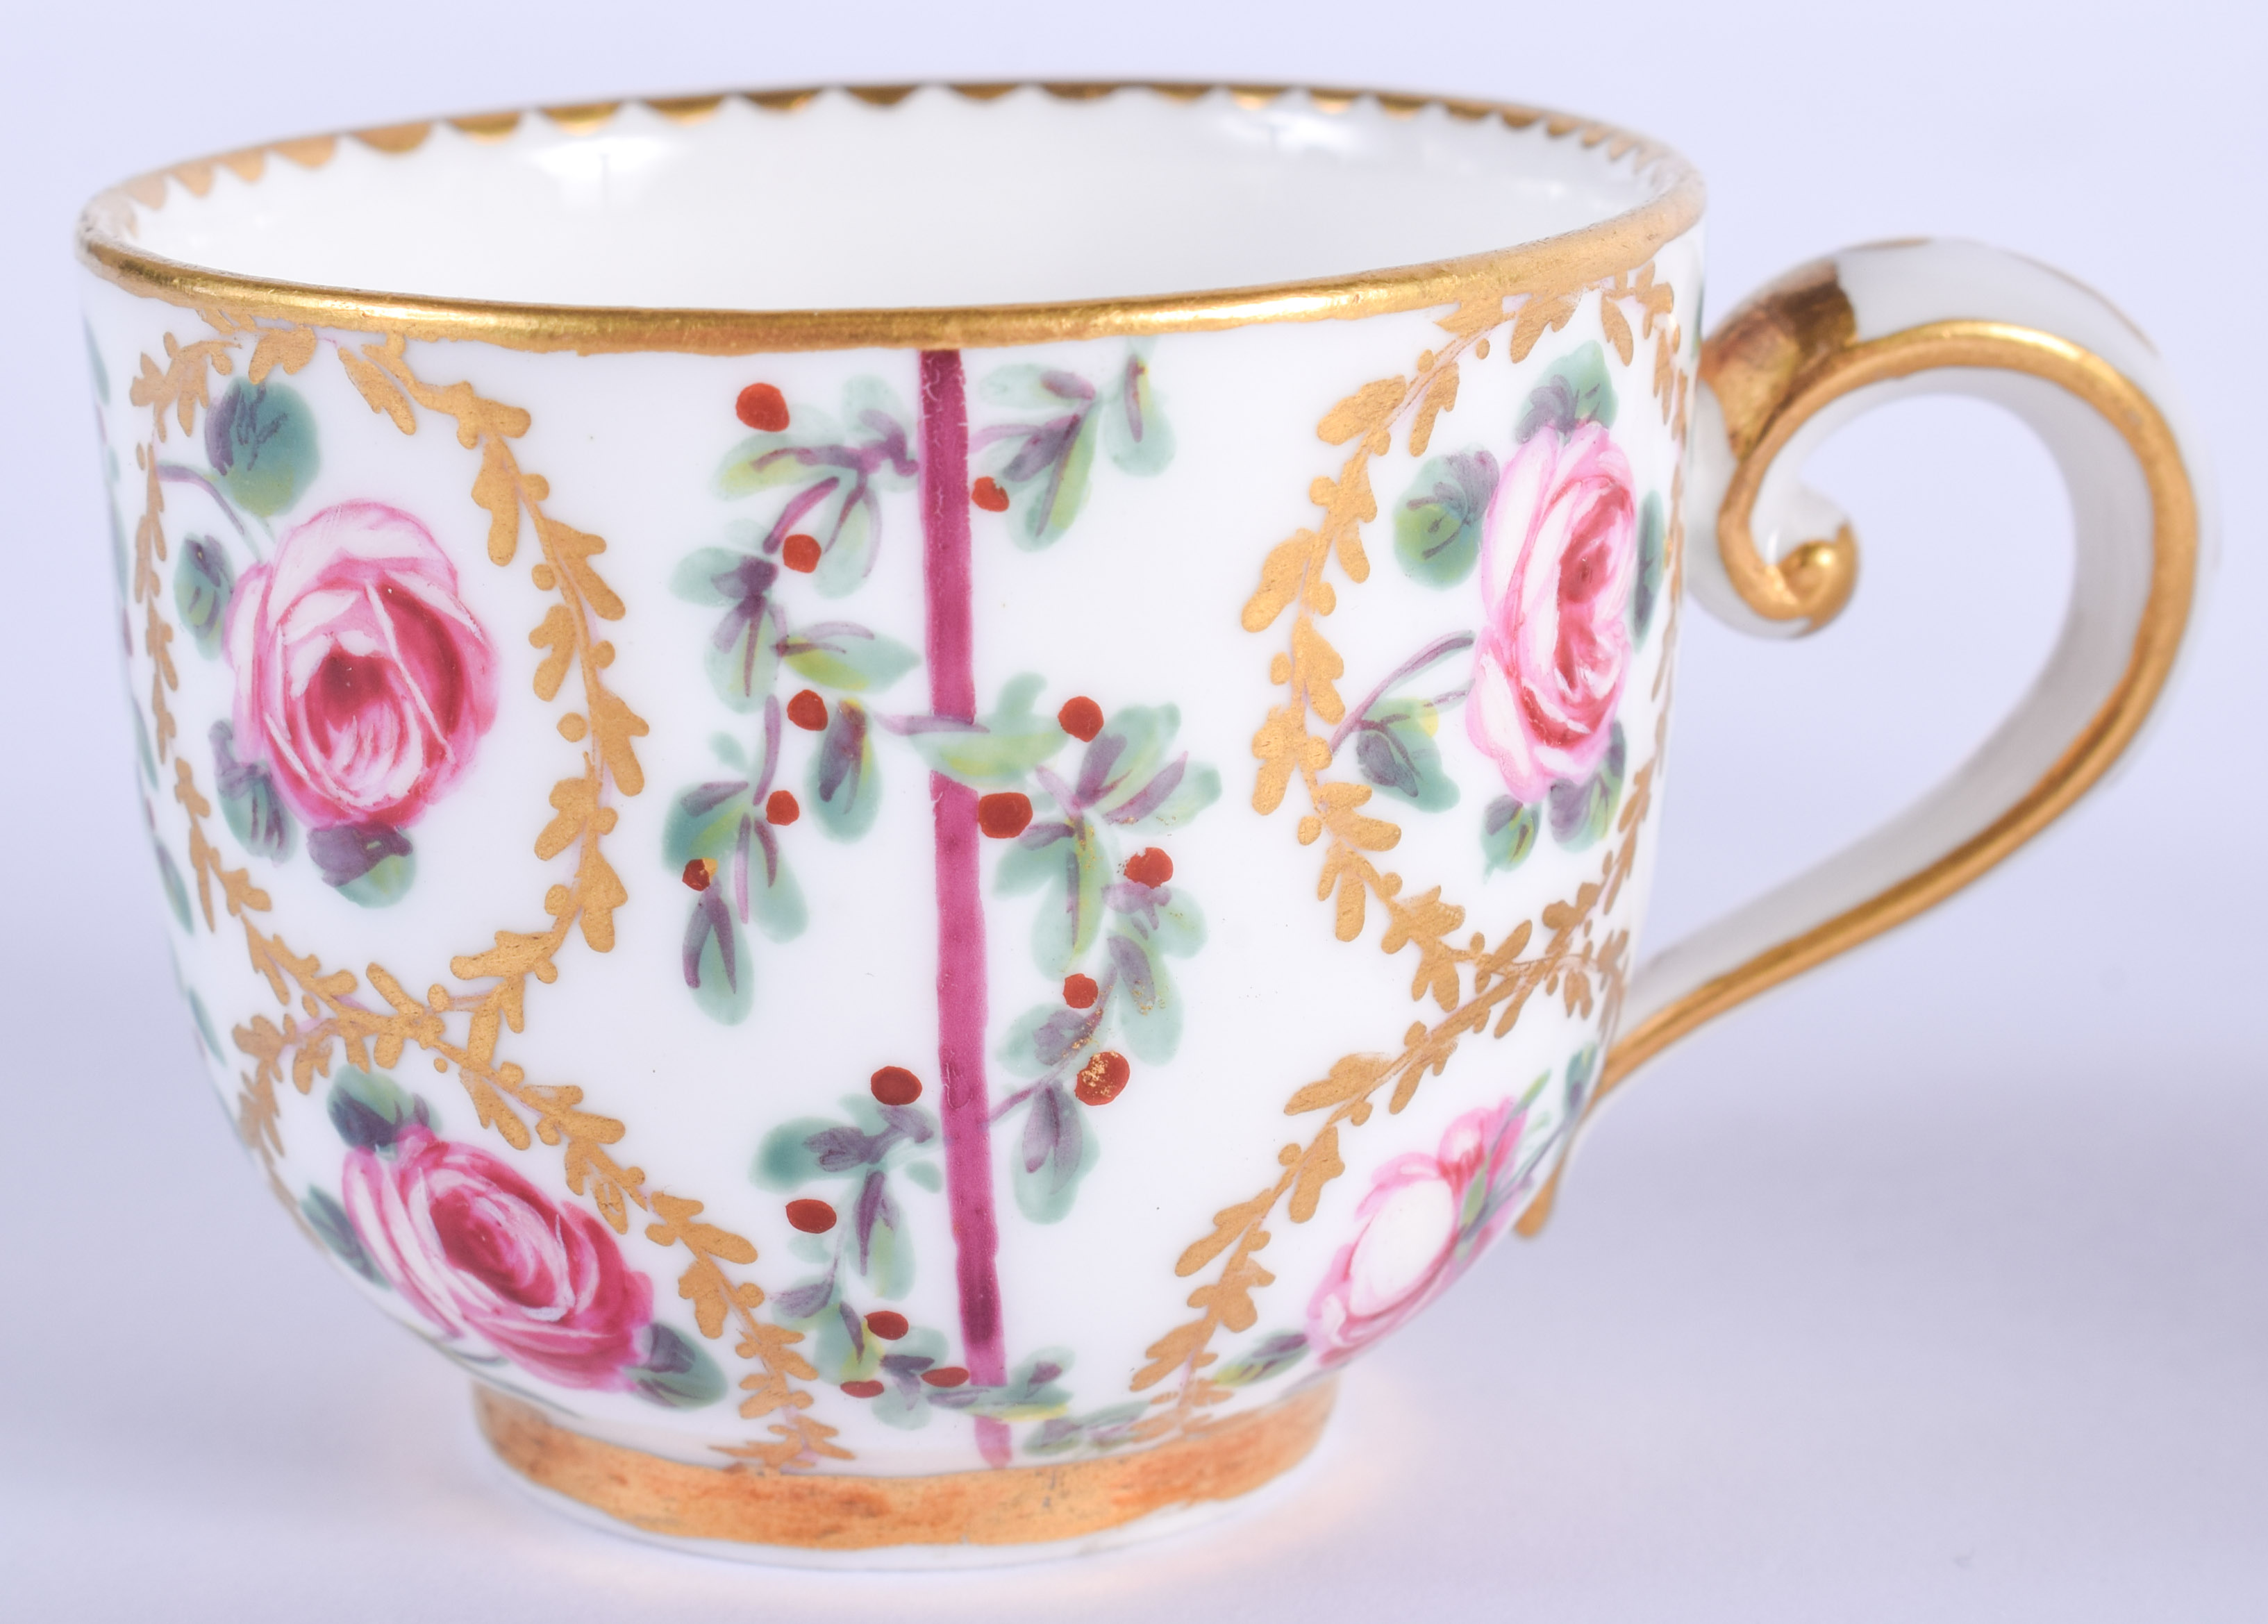 AN 18TH CENTURY SEVRES PORCELAIN CUP AND SAUCER painted with roses and gilt vines. (2) - Image 2 of 3